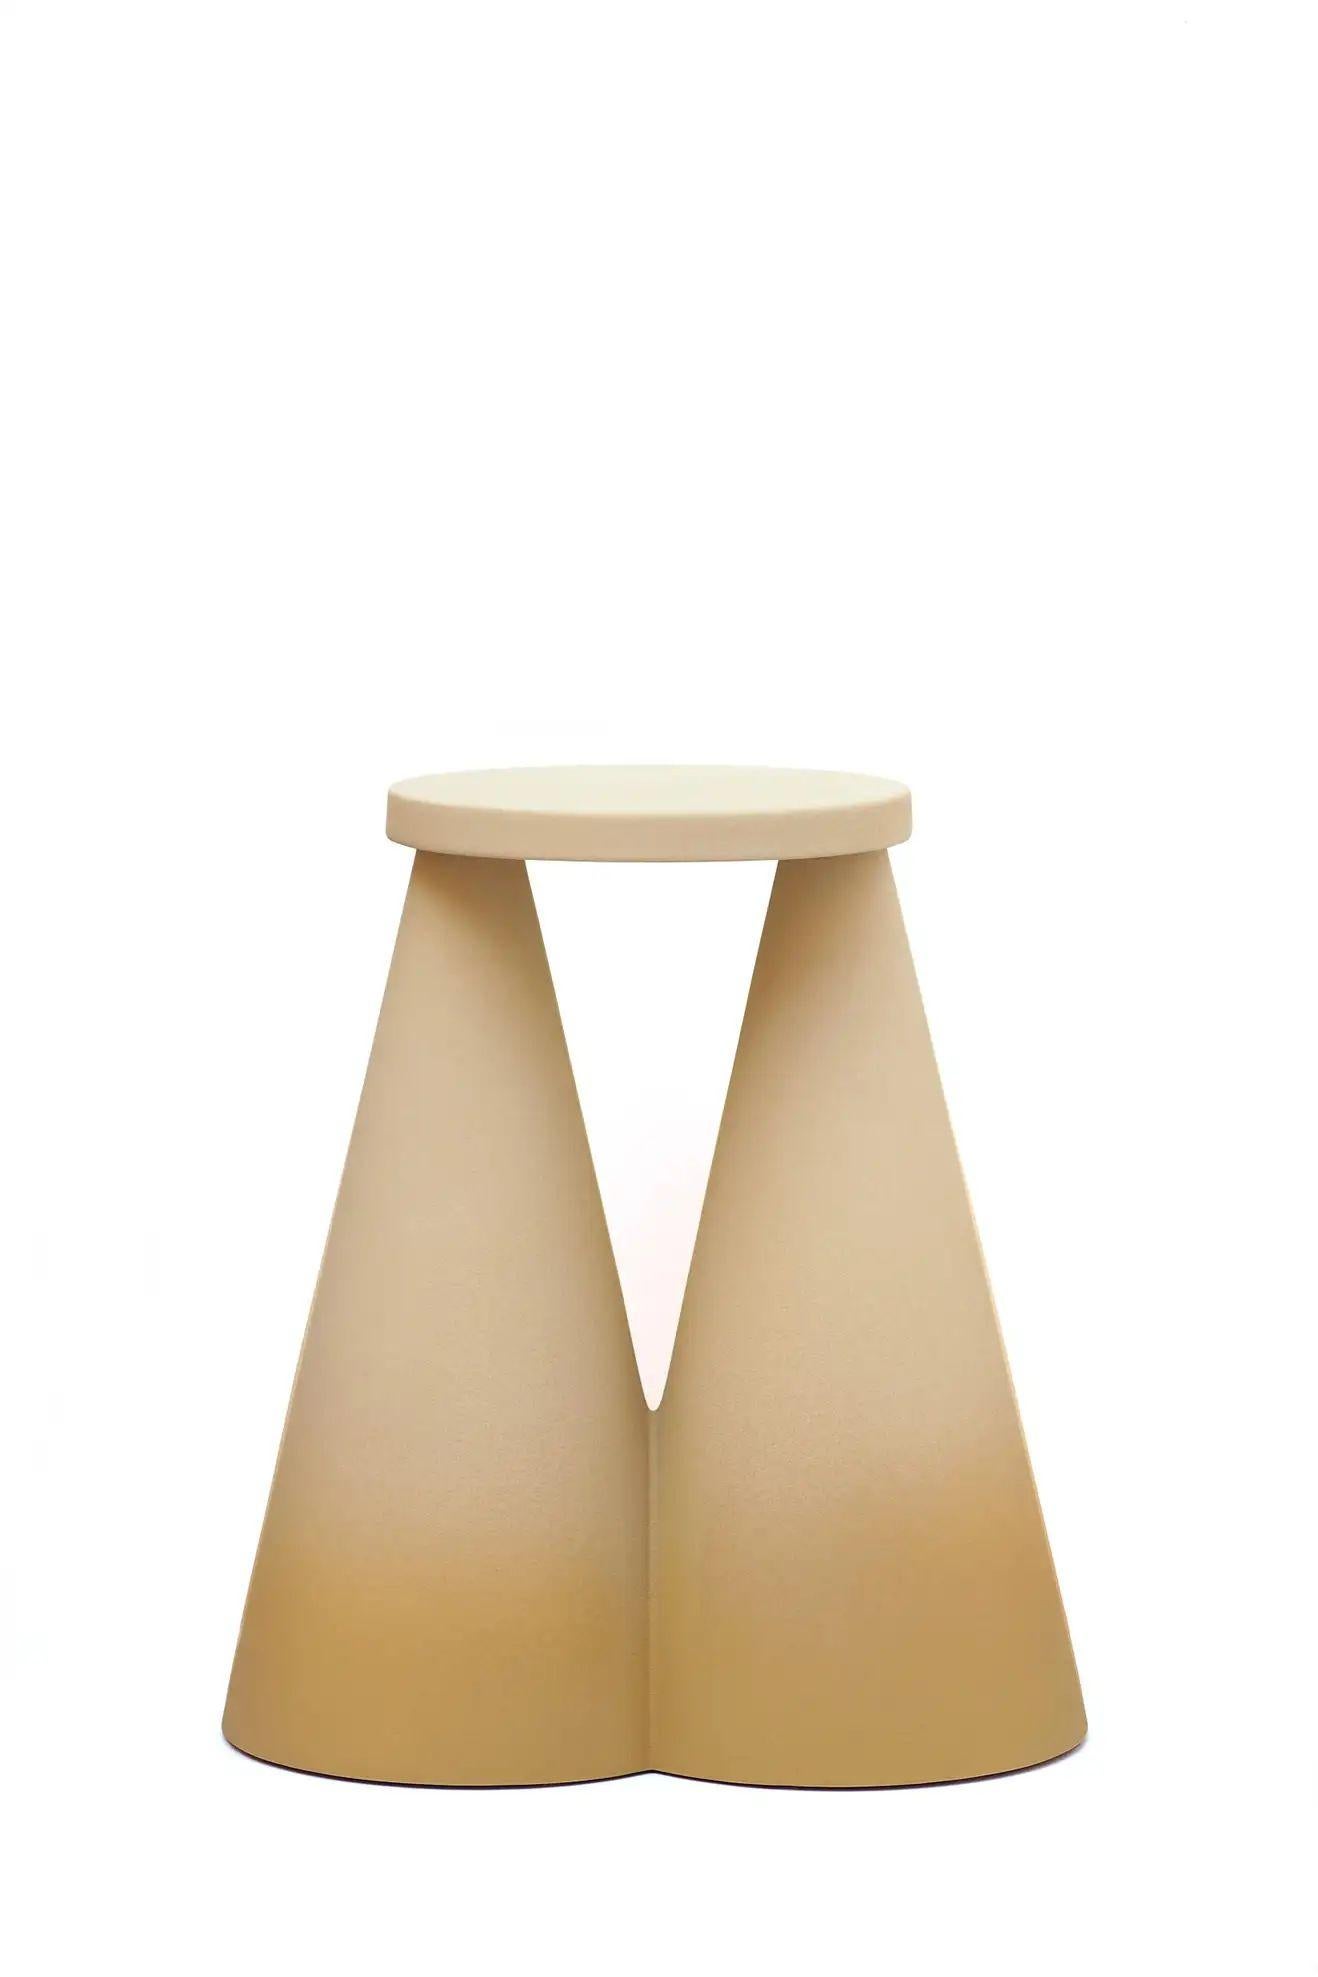 Pair of Isola Side Table by Cara Davide 13